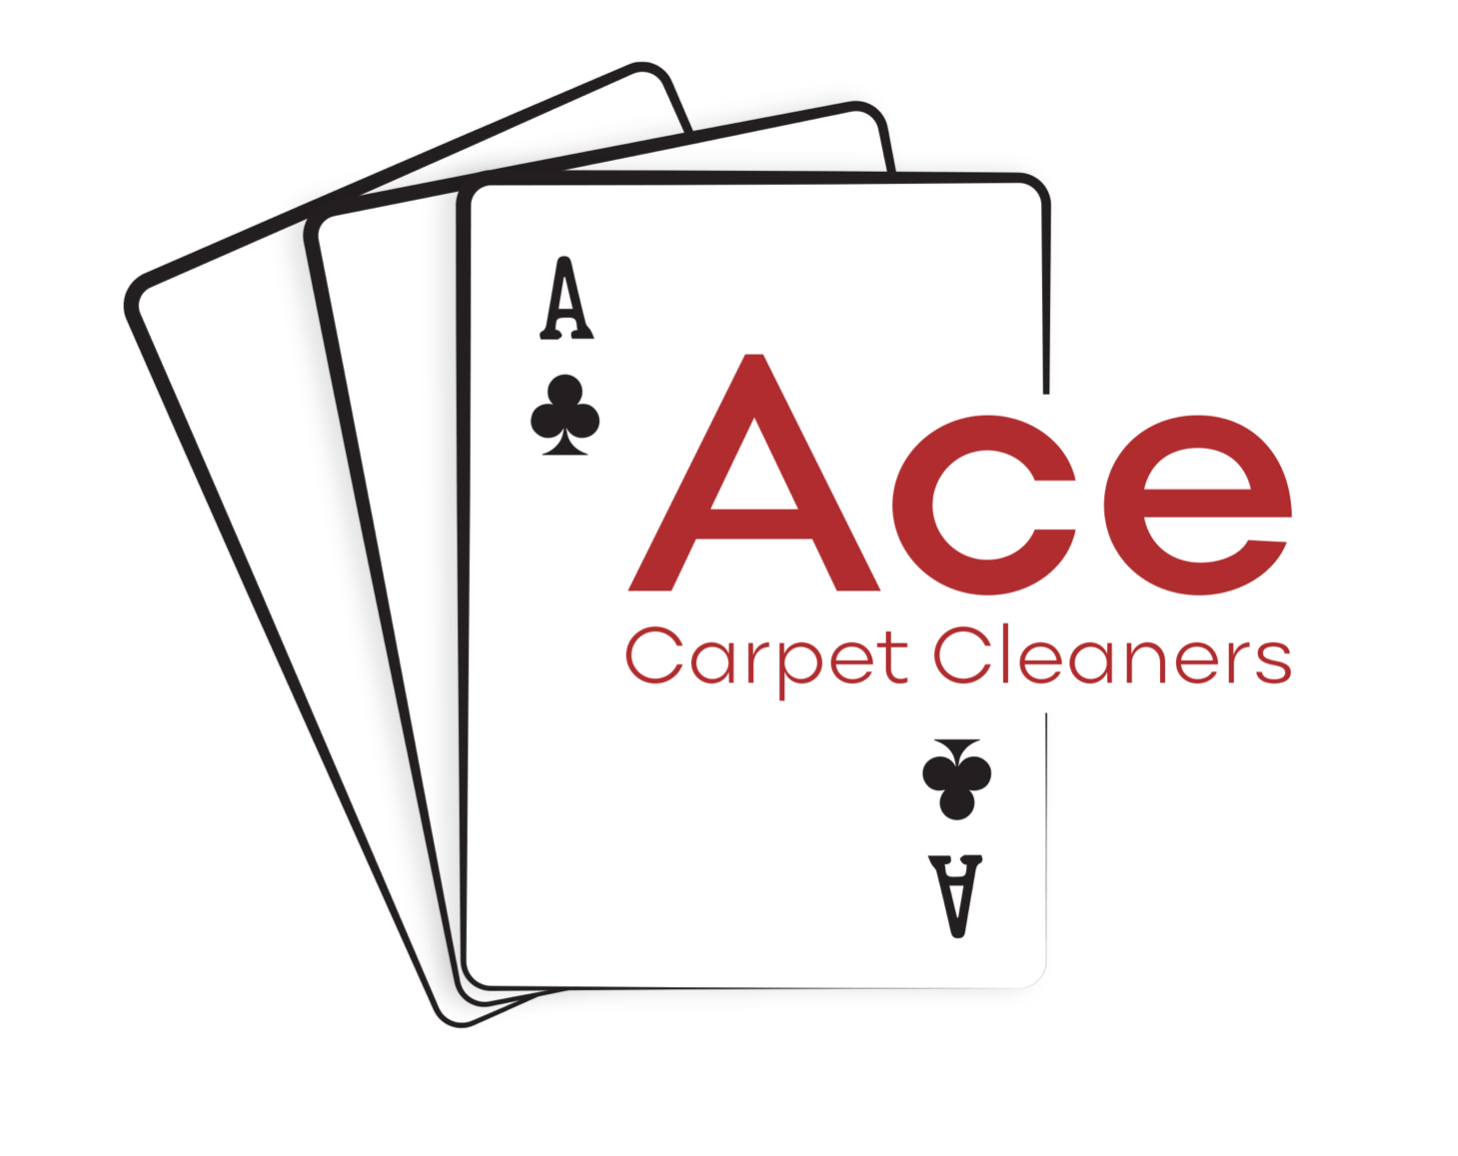 ace carpet cleaners logo